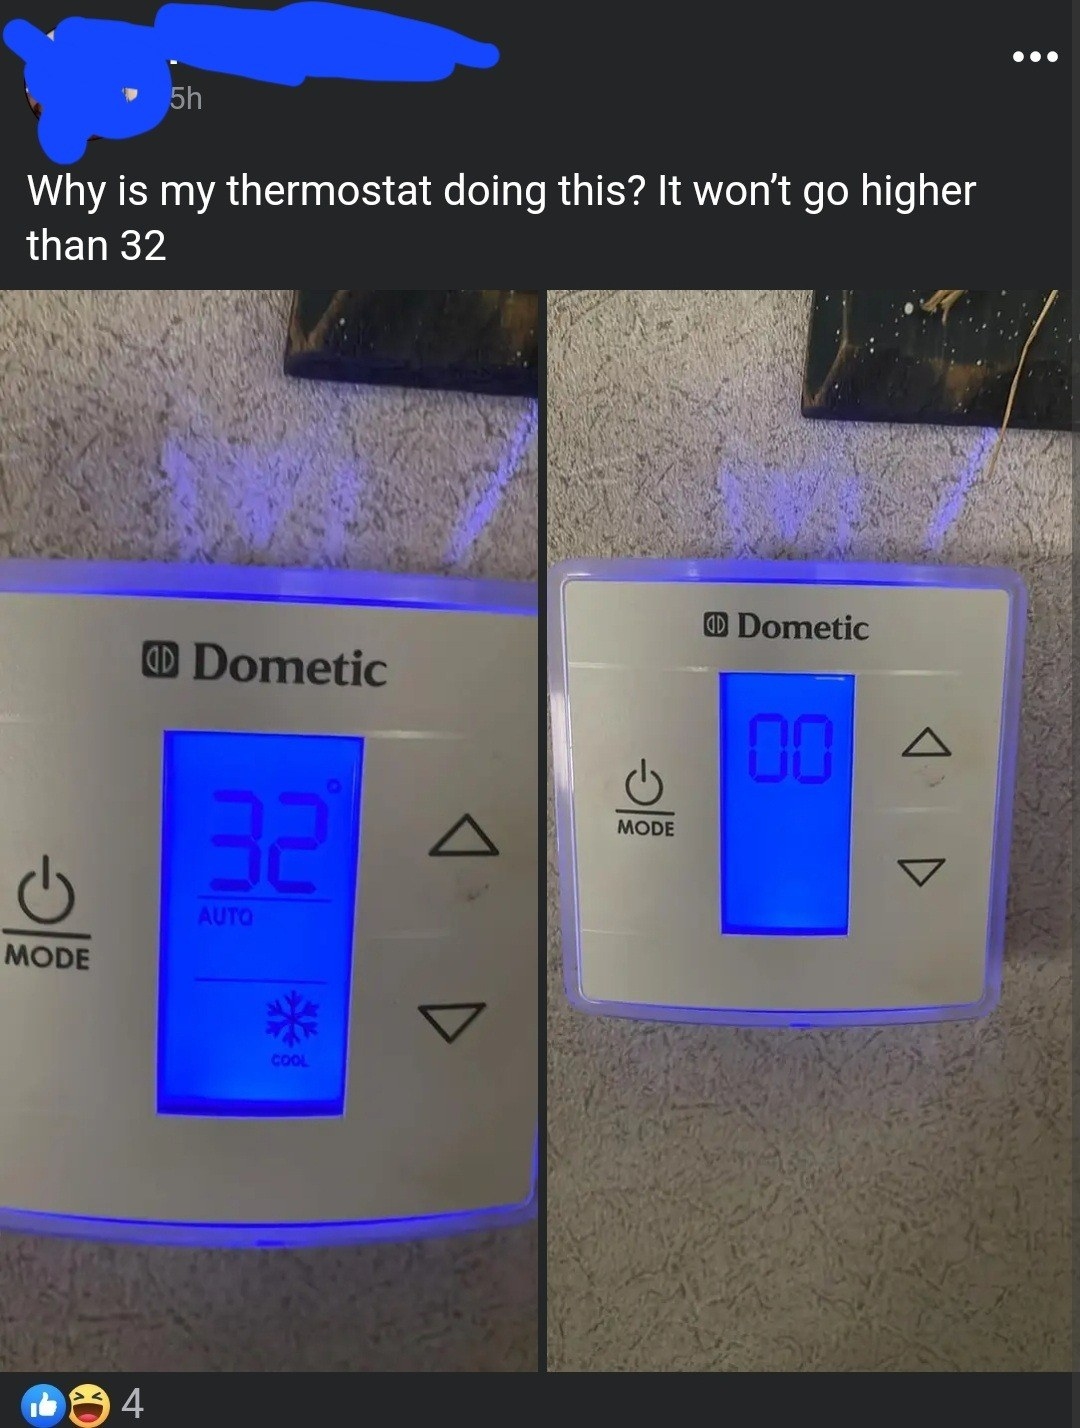 person confused why their thermostat only goes to 32